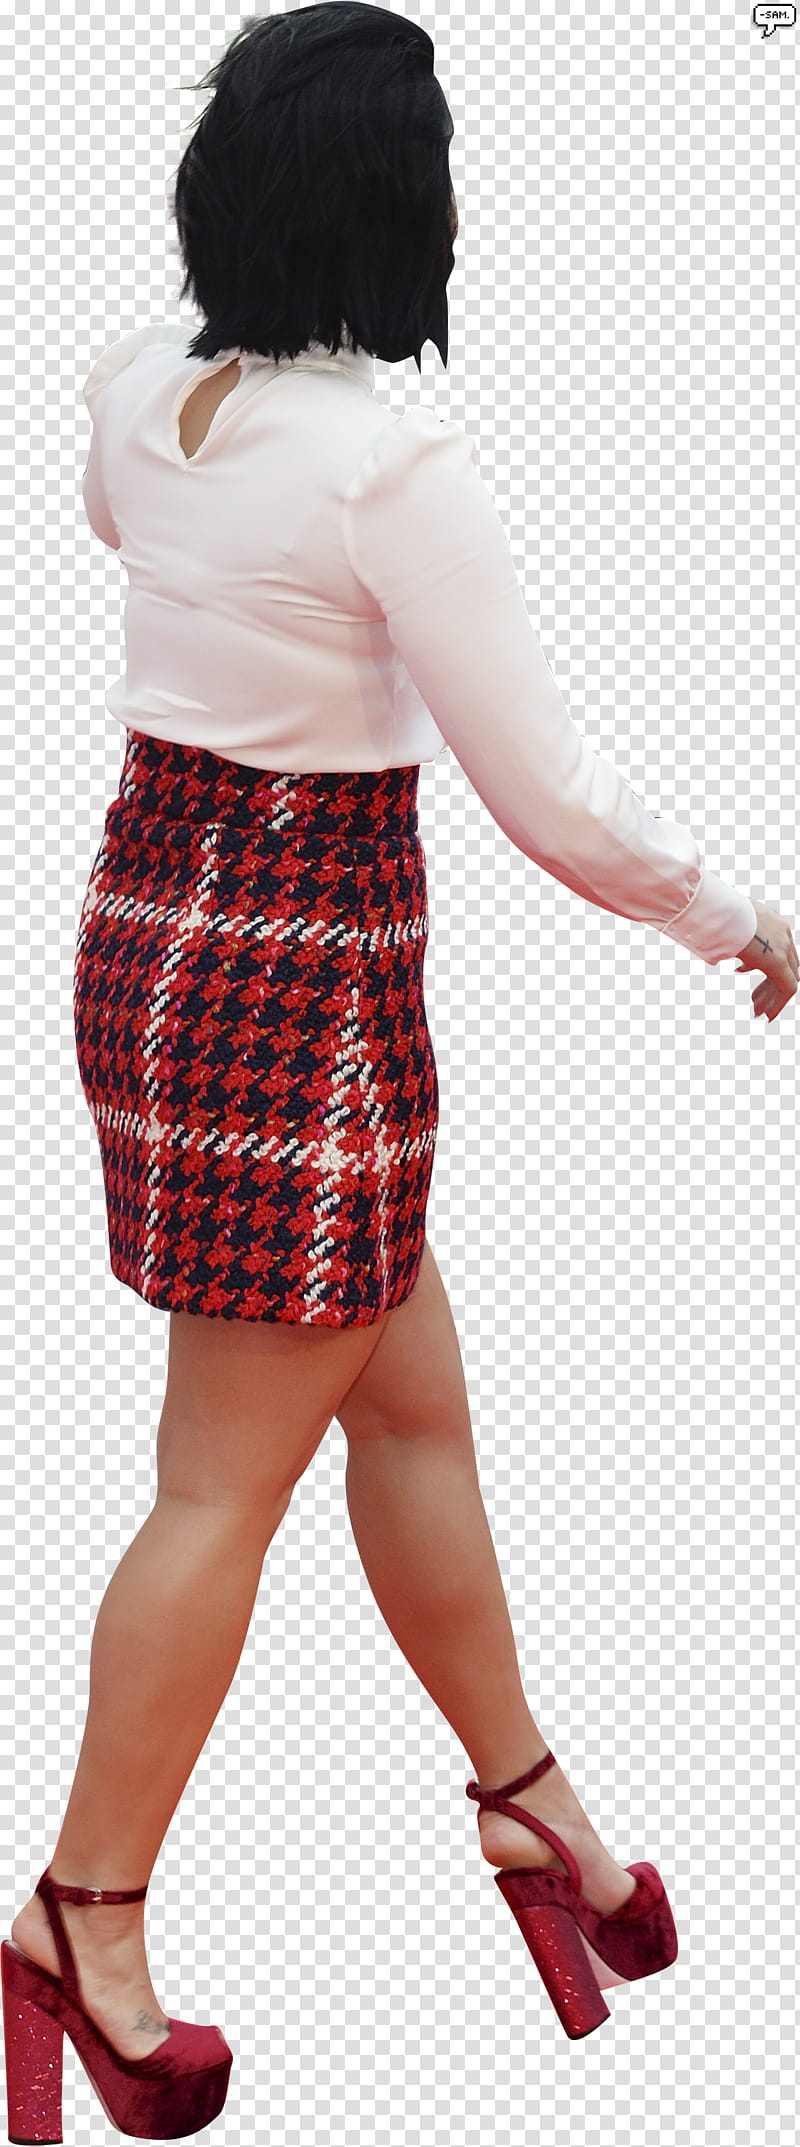 Demi Lovato , woman wearing white long-sleeved blouse and and houndstooth pencil skirt walking transparent background PNG clipart